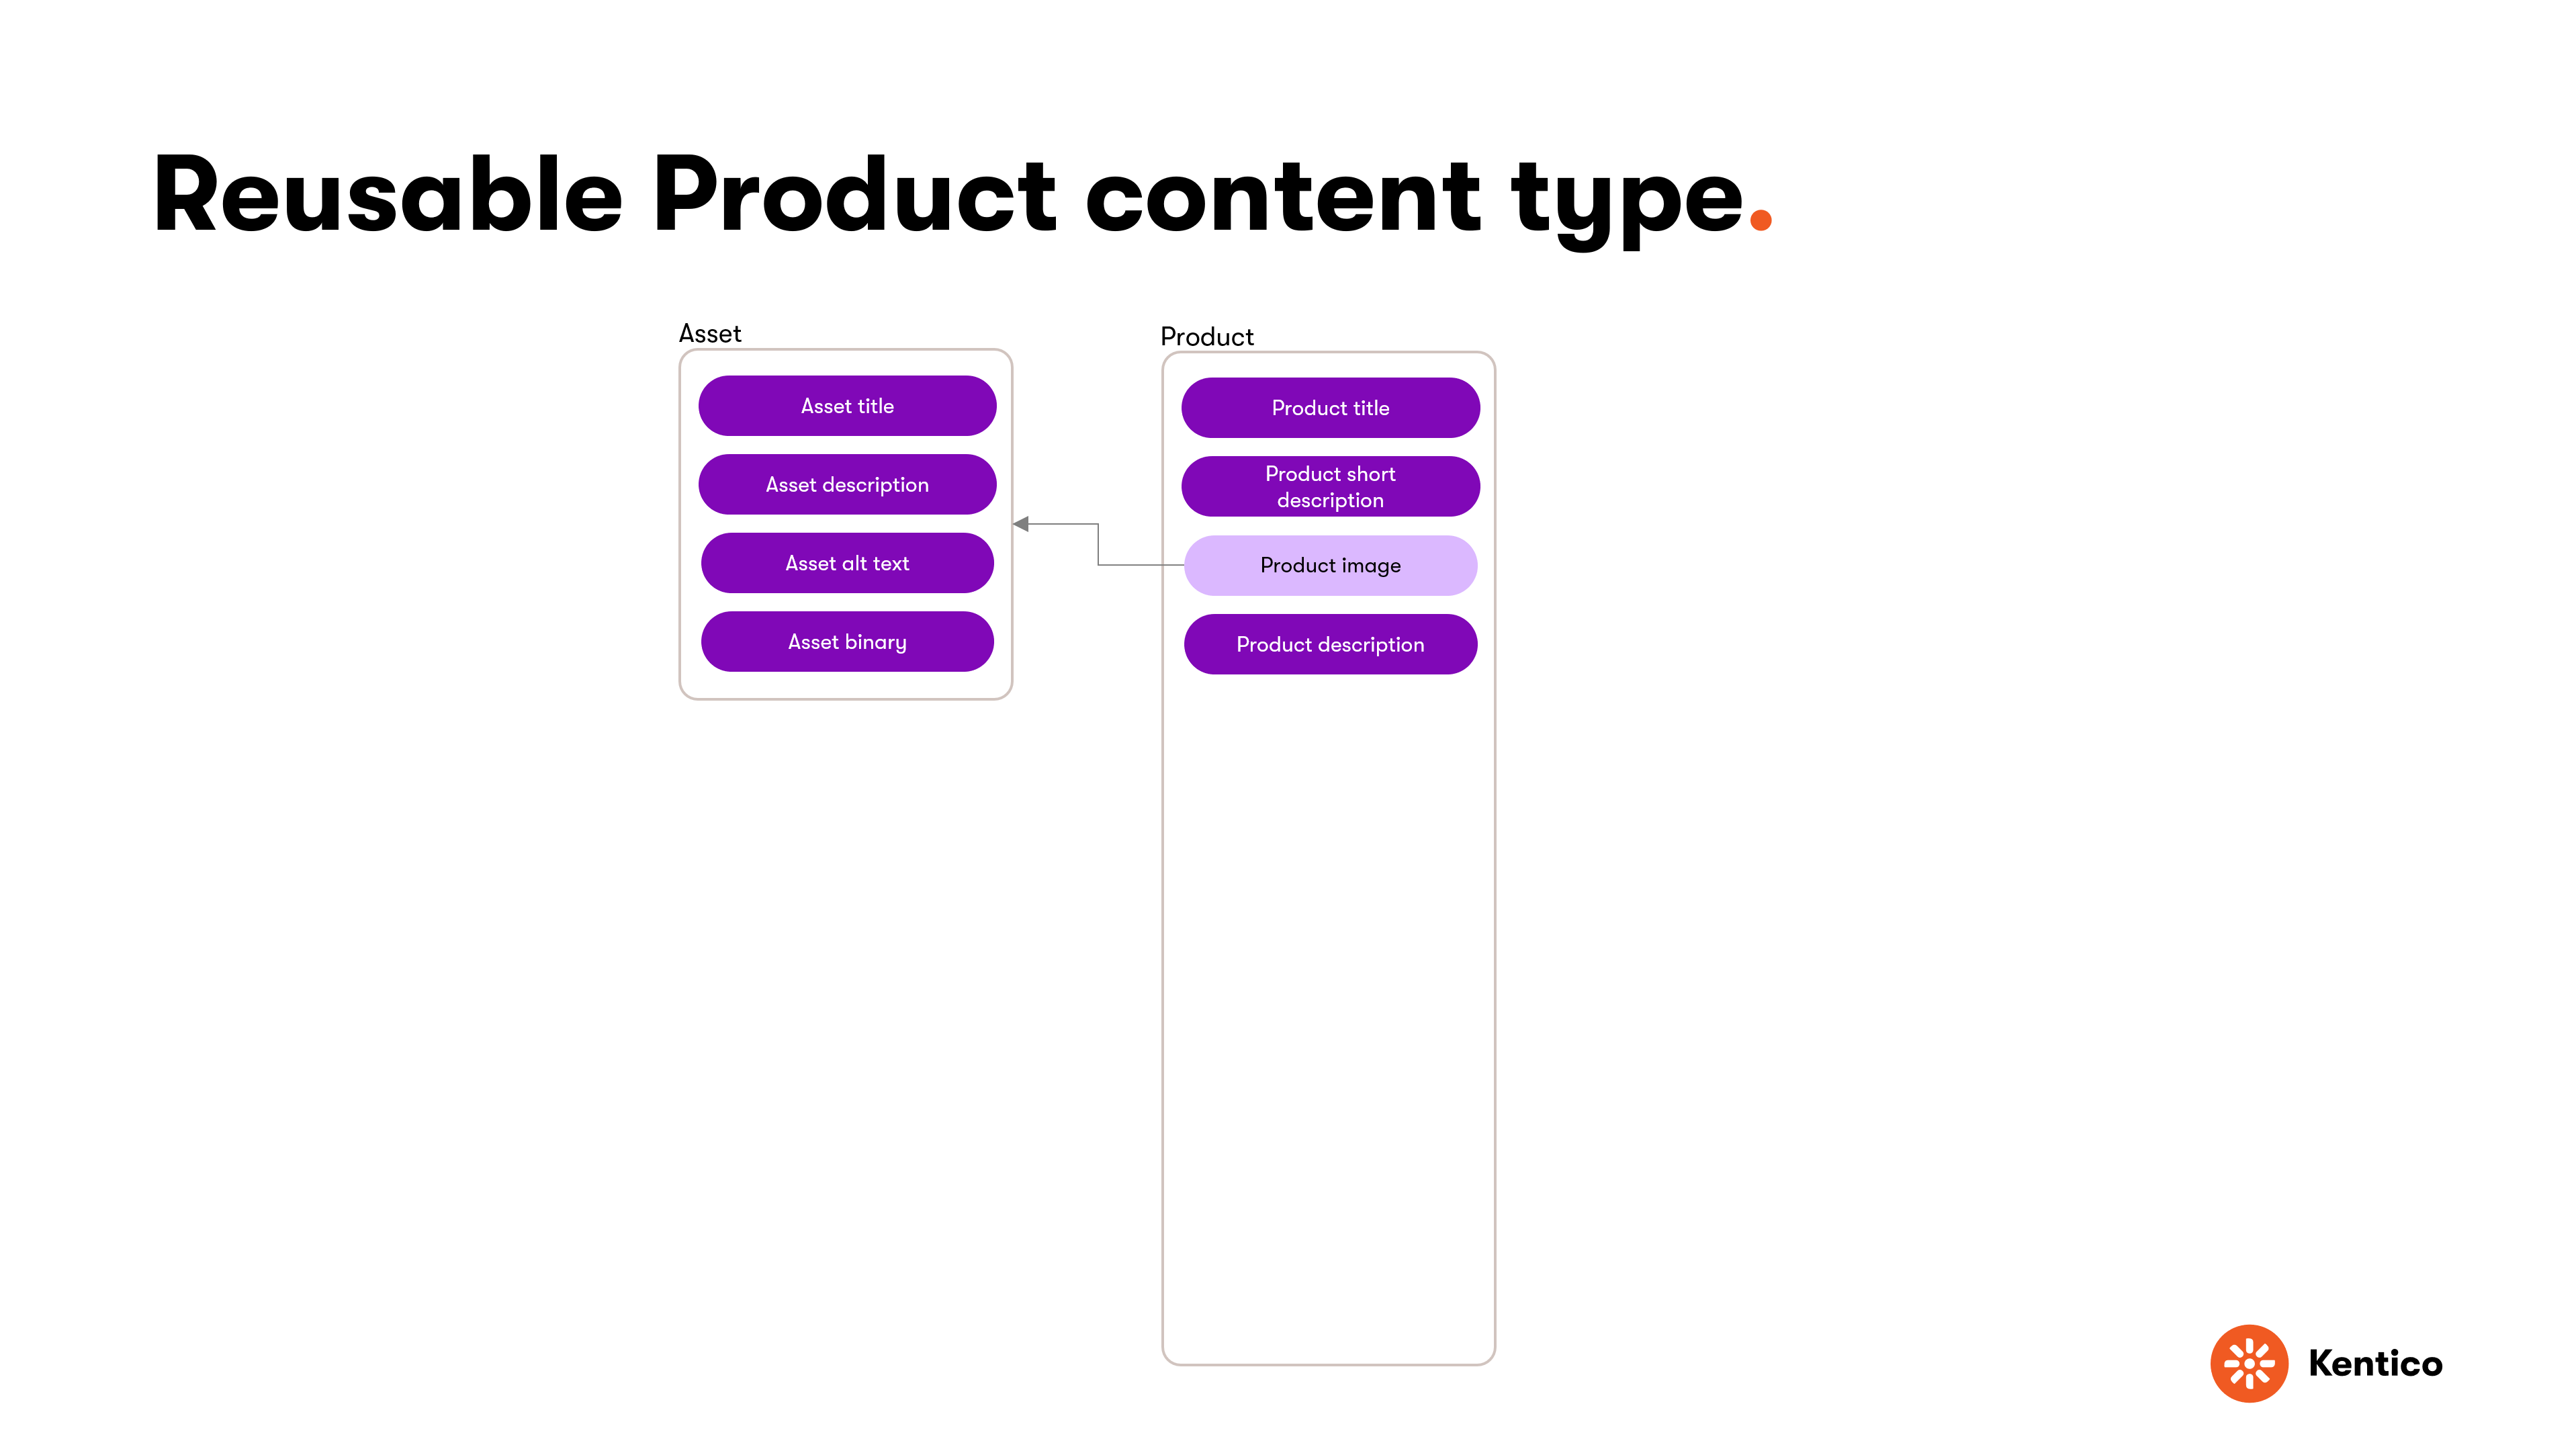 Product content type with reusable Asset content type